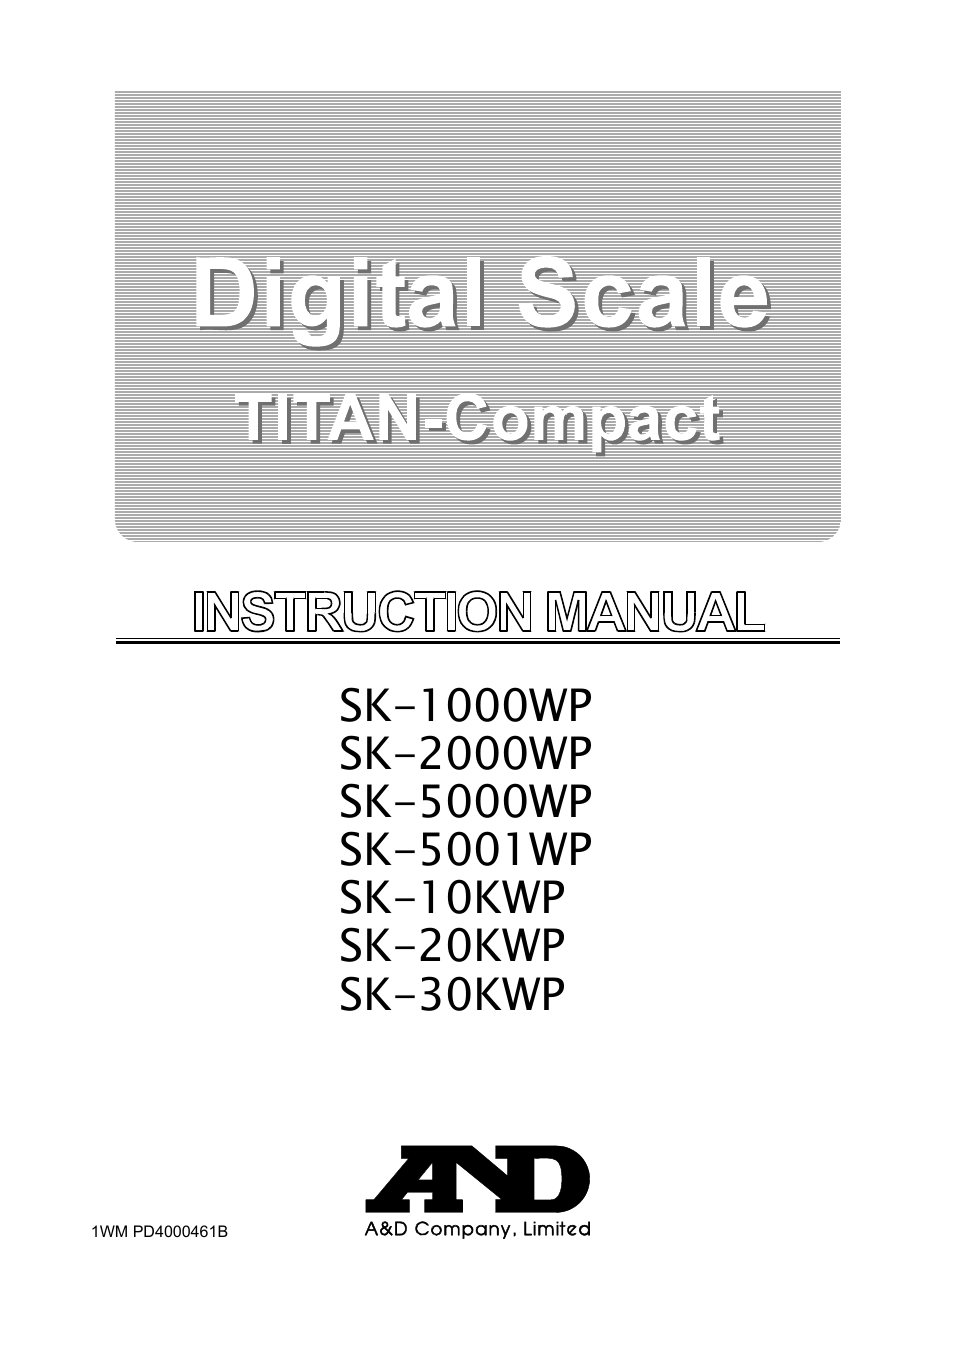 Digital Scale SK-1000WP (Page 1)